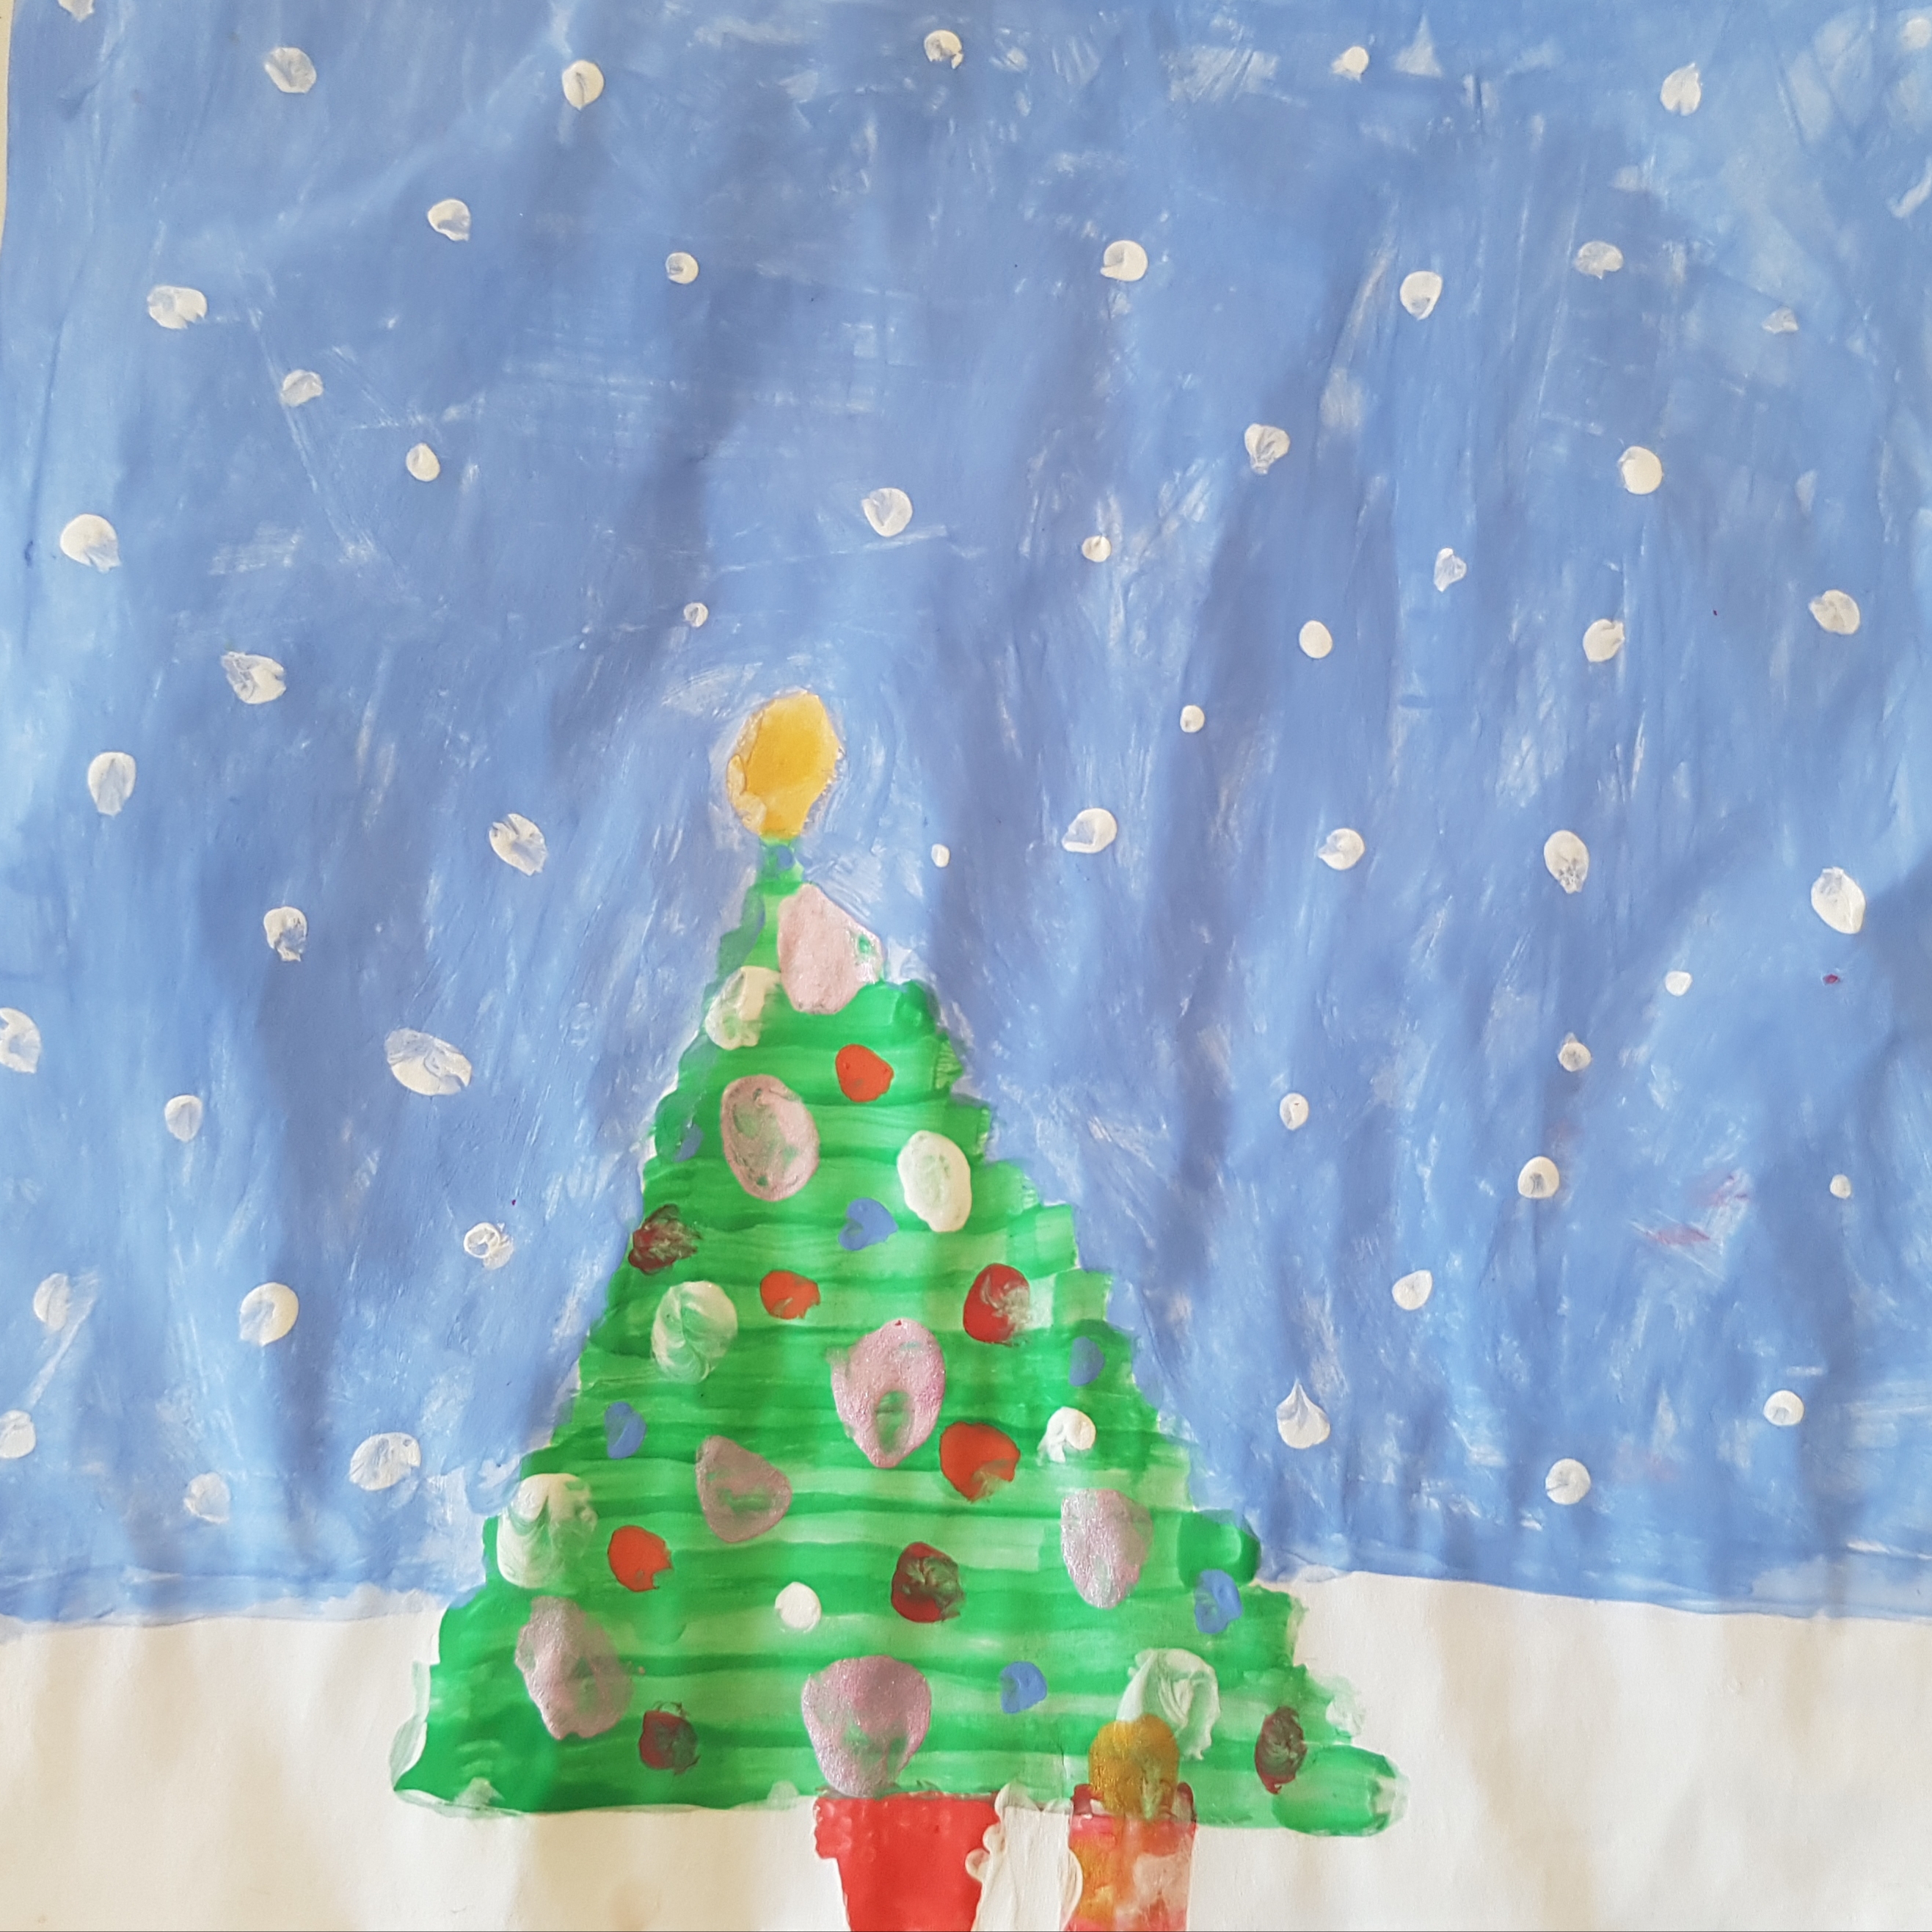 'The Lonely Christmas Tree' by Cara (7) from Louth